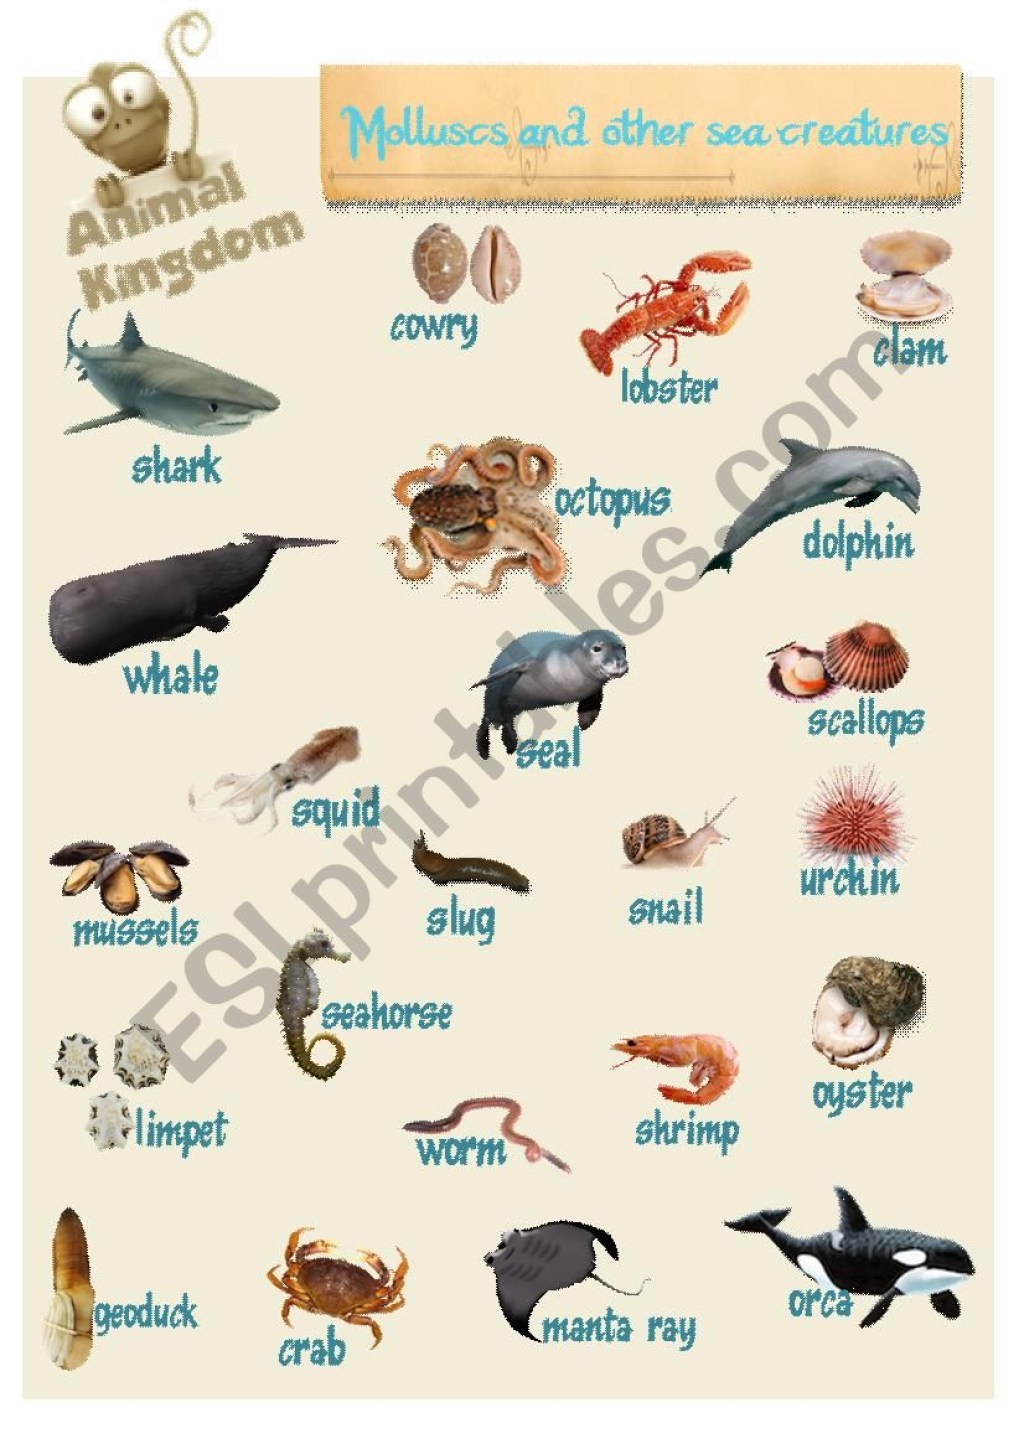 Picture of: Animal Kingdom – Molluscs and other sea creatures – ESL worksheet